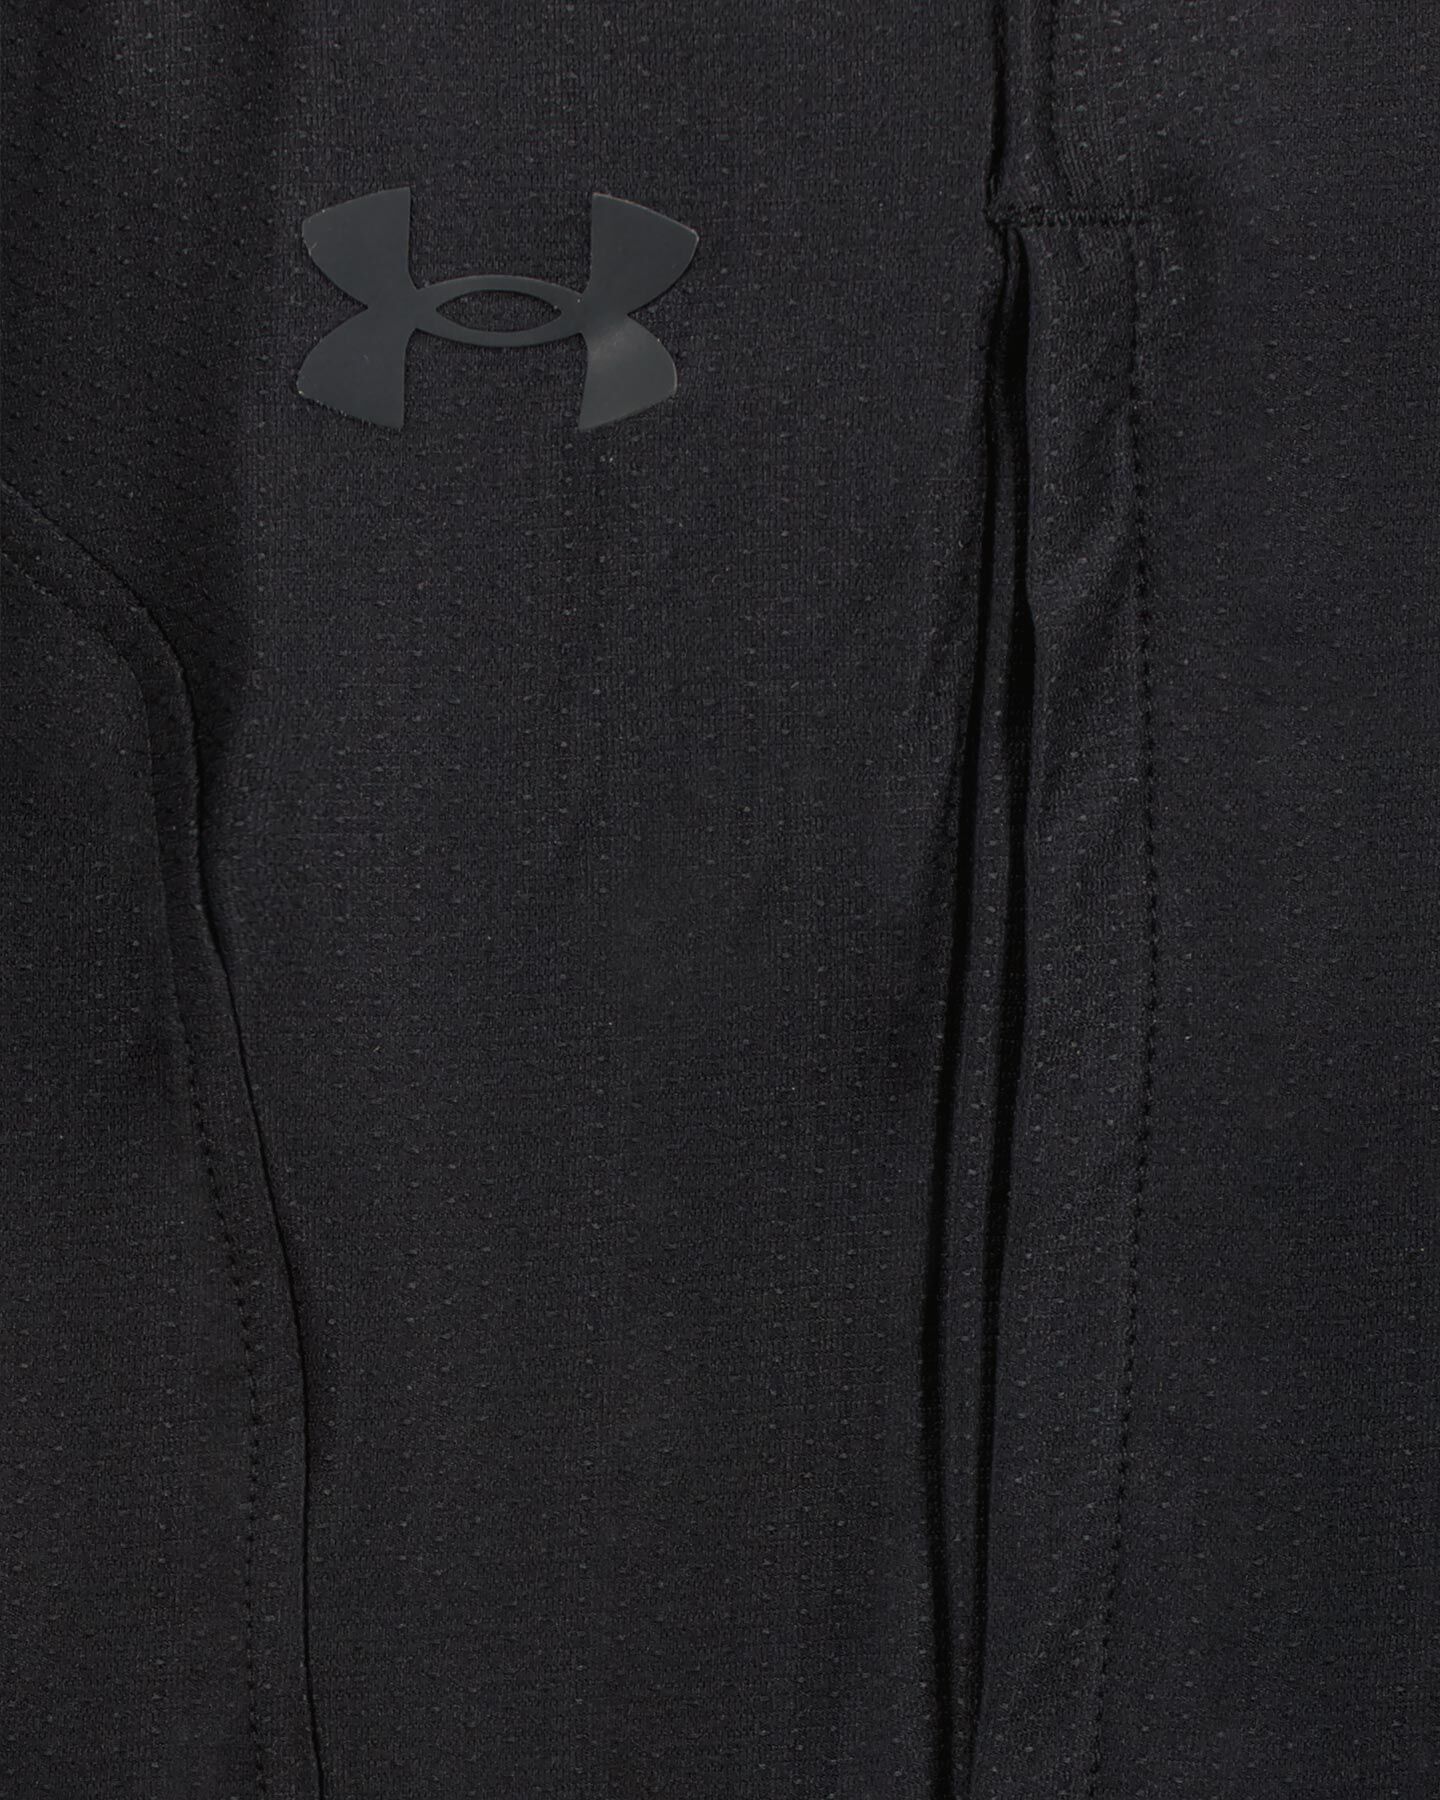  Pantaloncini basket UNDER ARMOUR ELEVATED PERFORMANCE M S5229452|0001|SM scatto 3